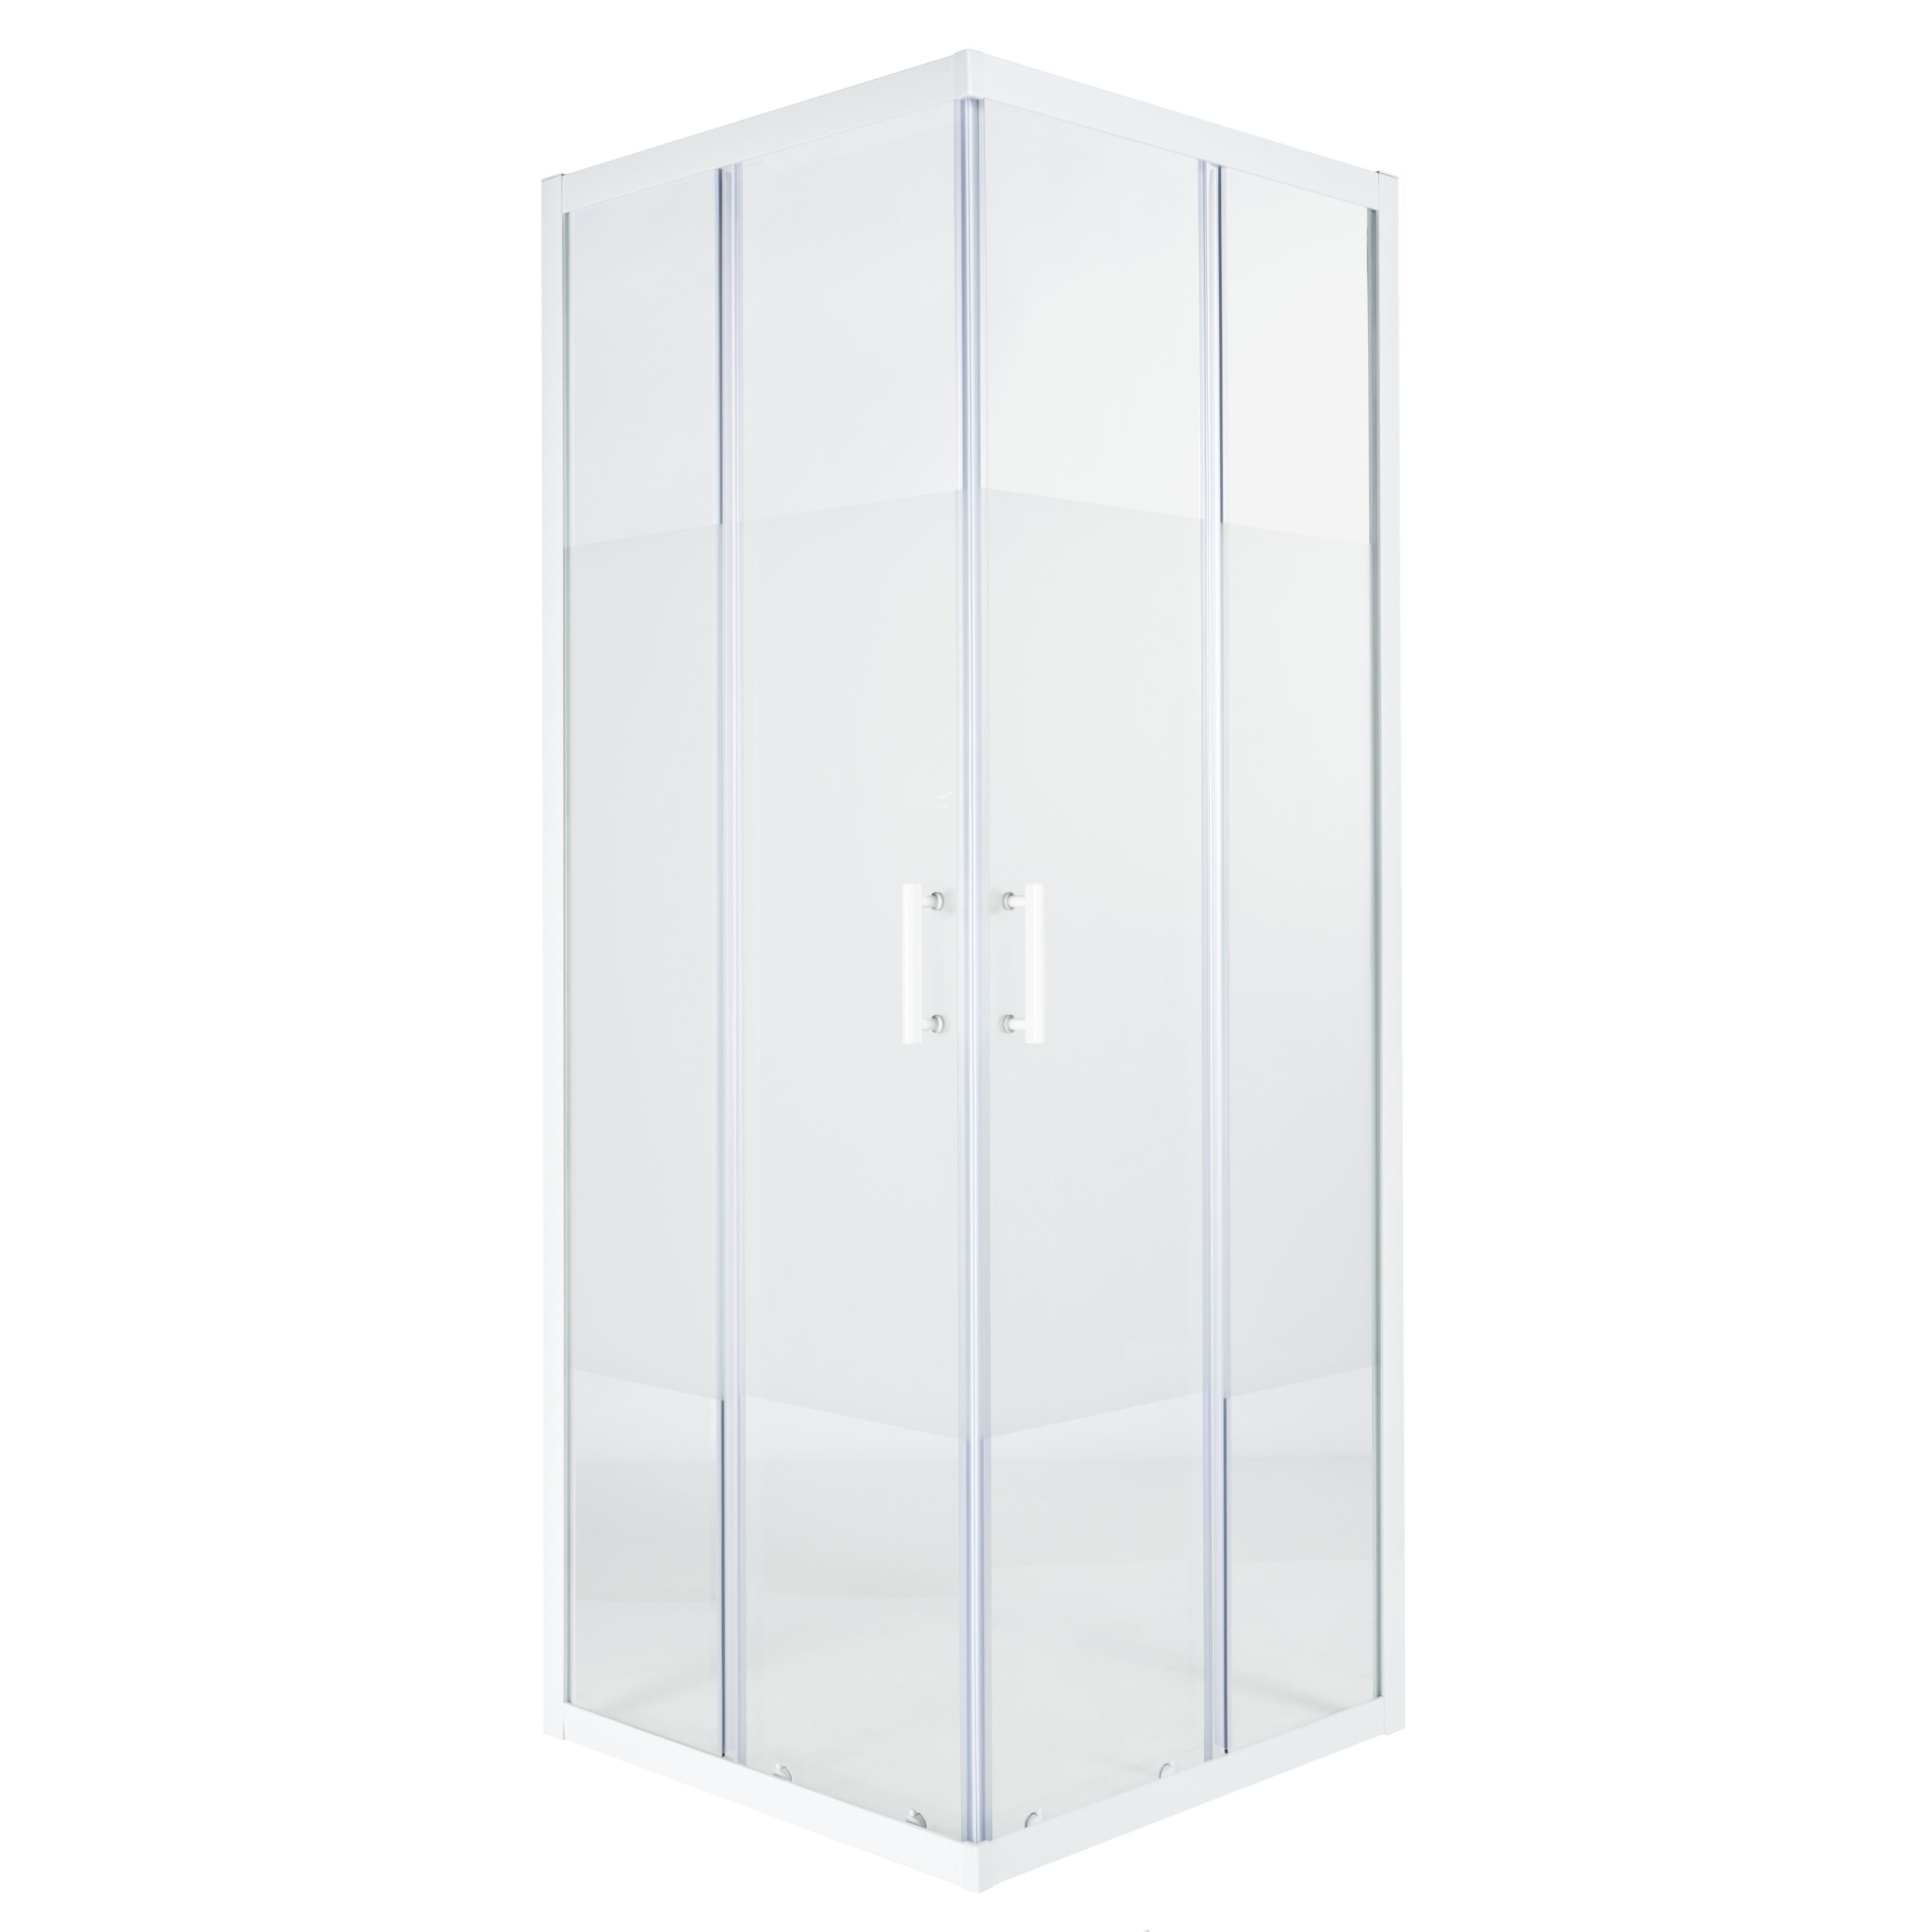 GoodHome Onega Frosted Square Shower Enclosure & tray - Corner entry double sliding door (H)190cm (W)90cm (D)90cm